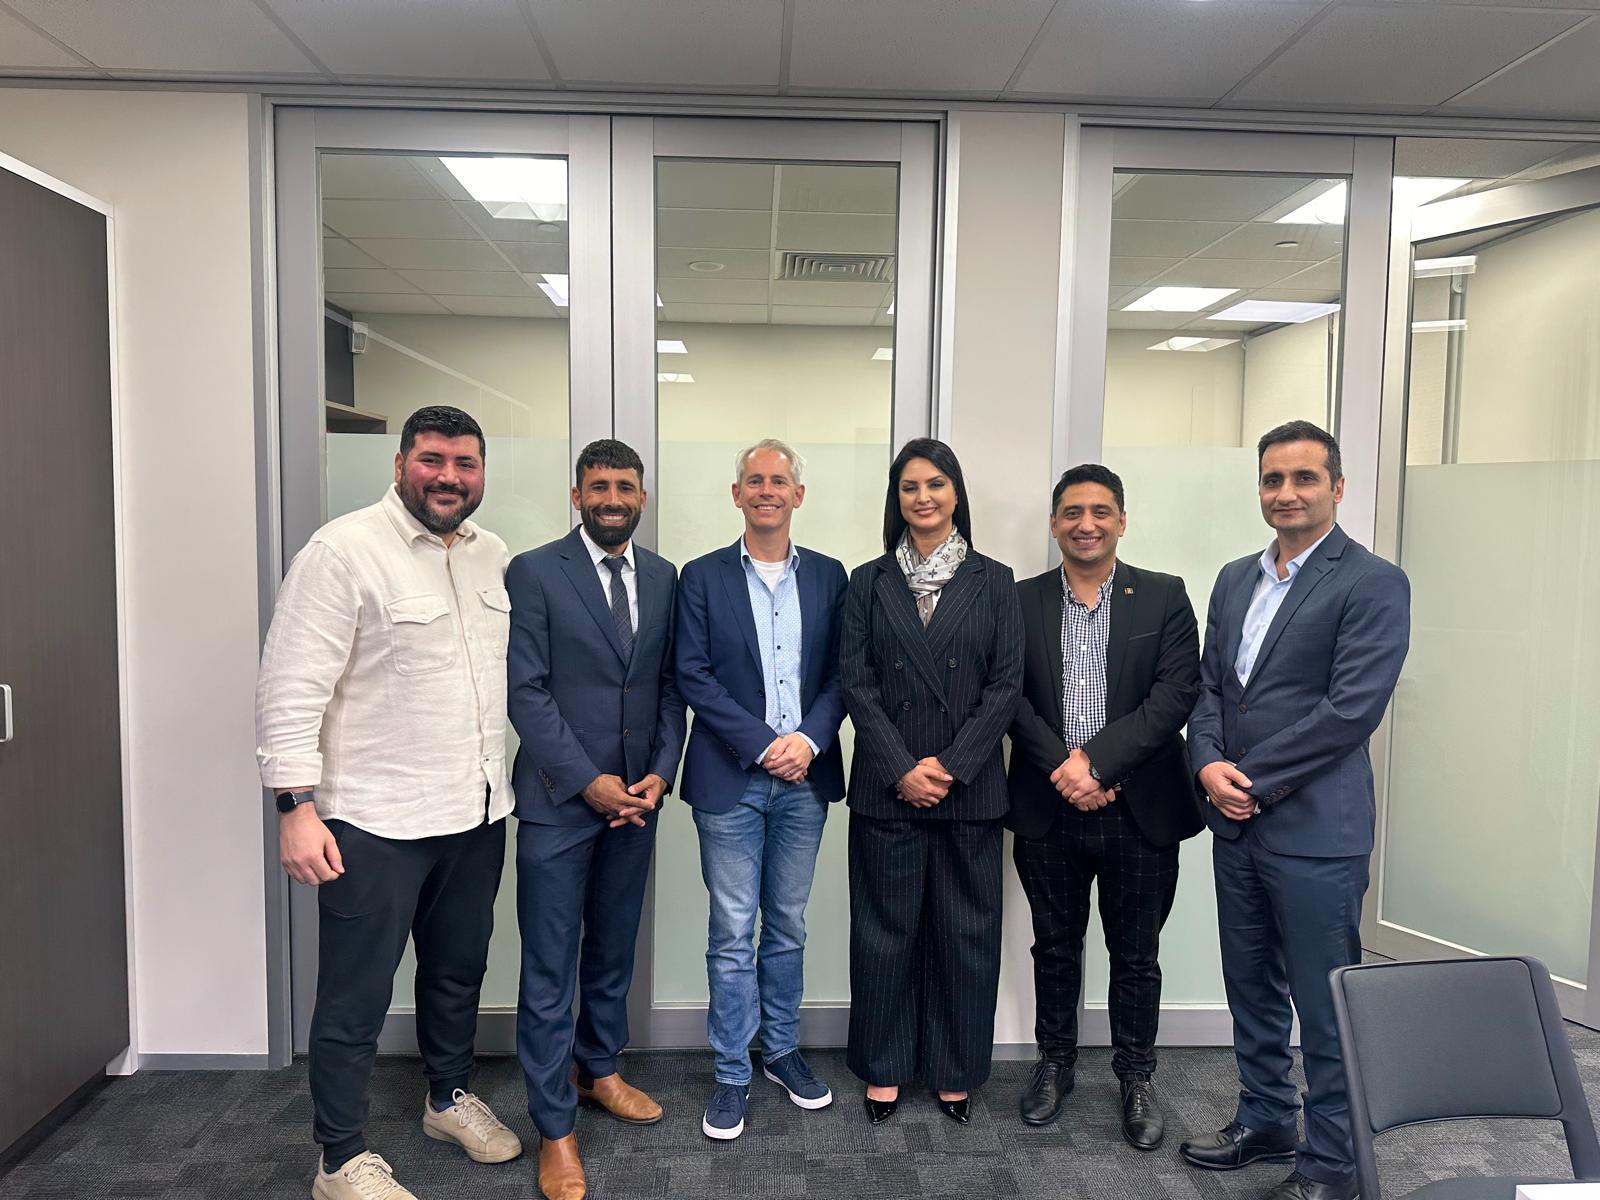 WEL meeting with the Honorable Minister of Immigration and Multicultural Affairs, Andrew Giles, and Brett Wood, Head of Government Relations at Cricket Australia.